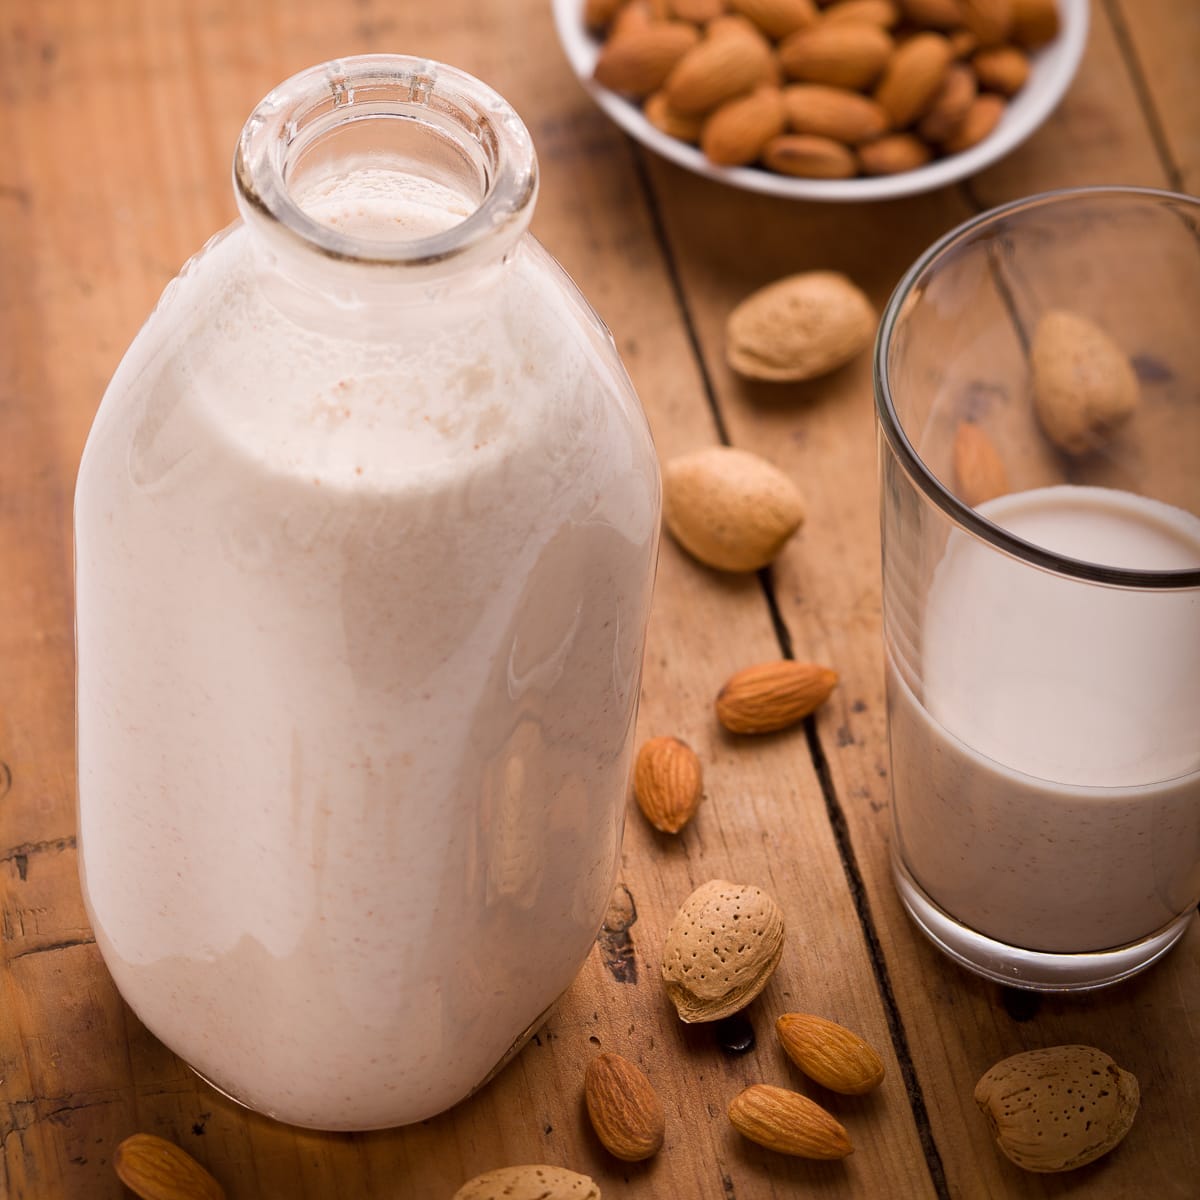 Bottle of homemade almond milk and glass of it with almonds.